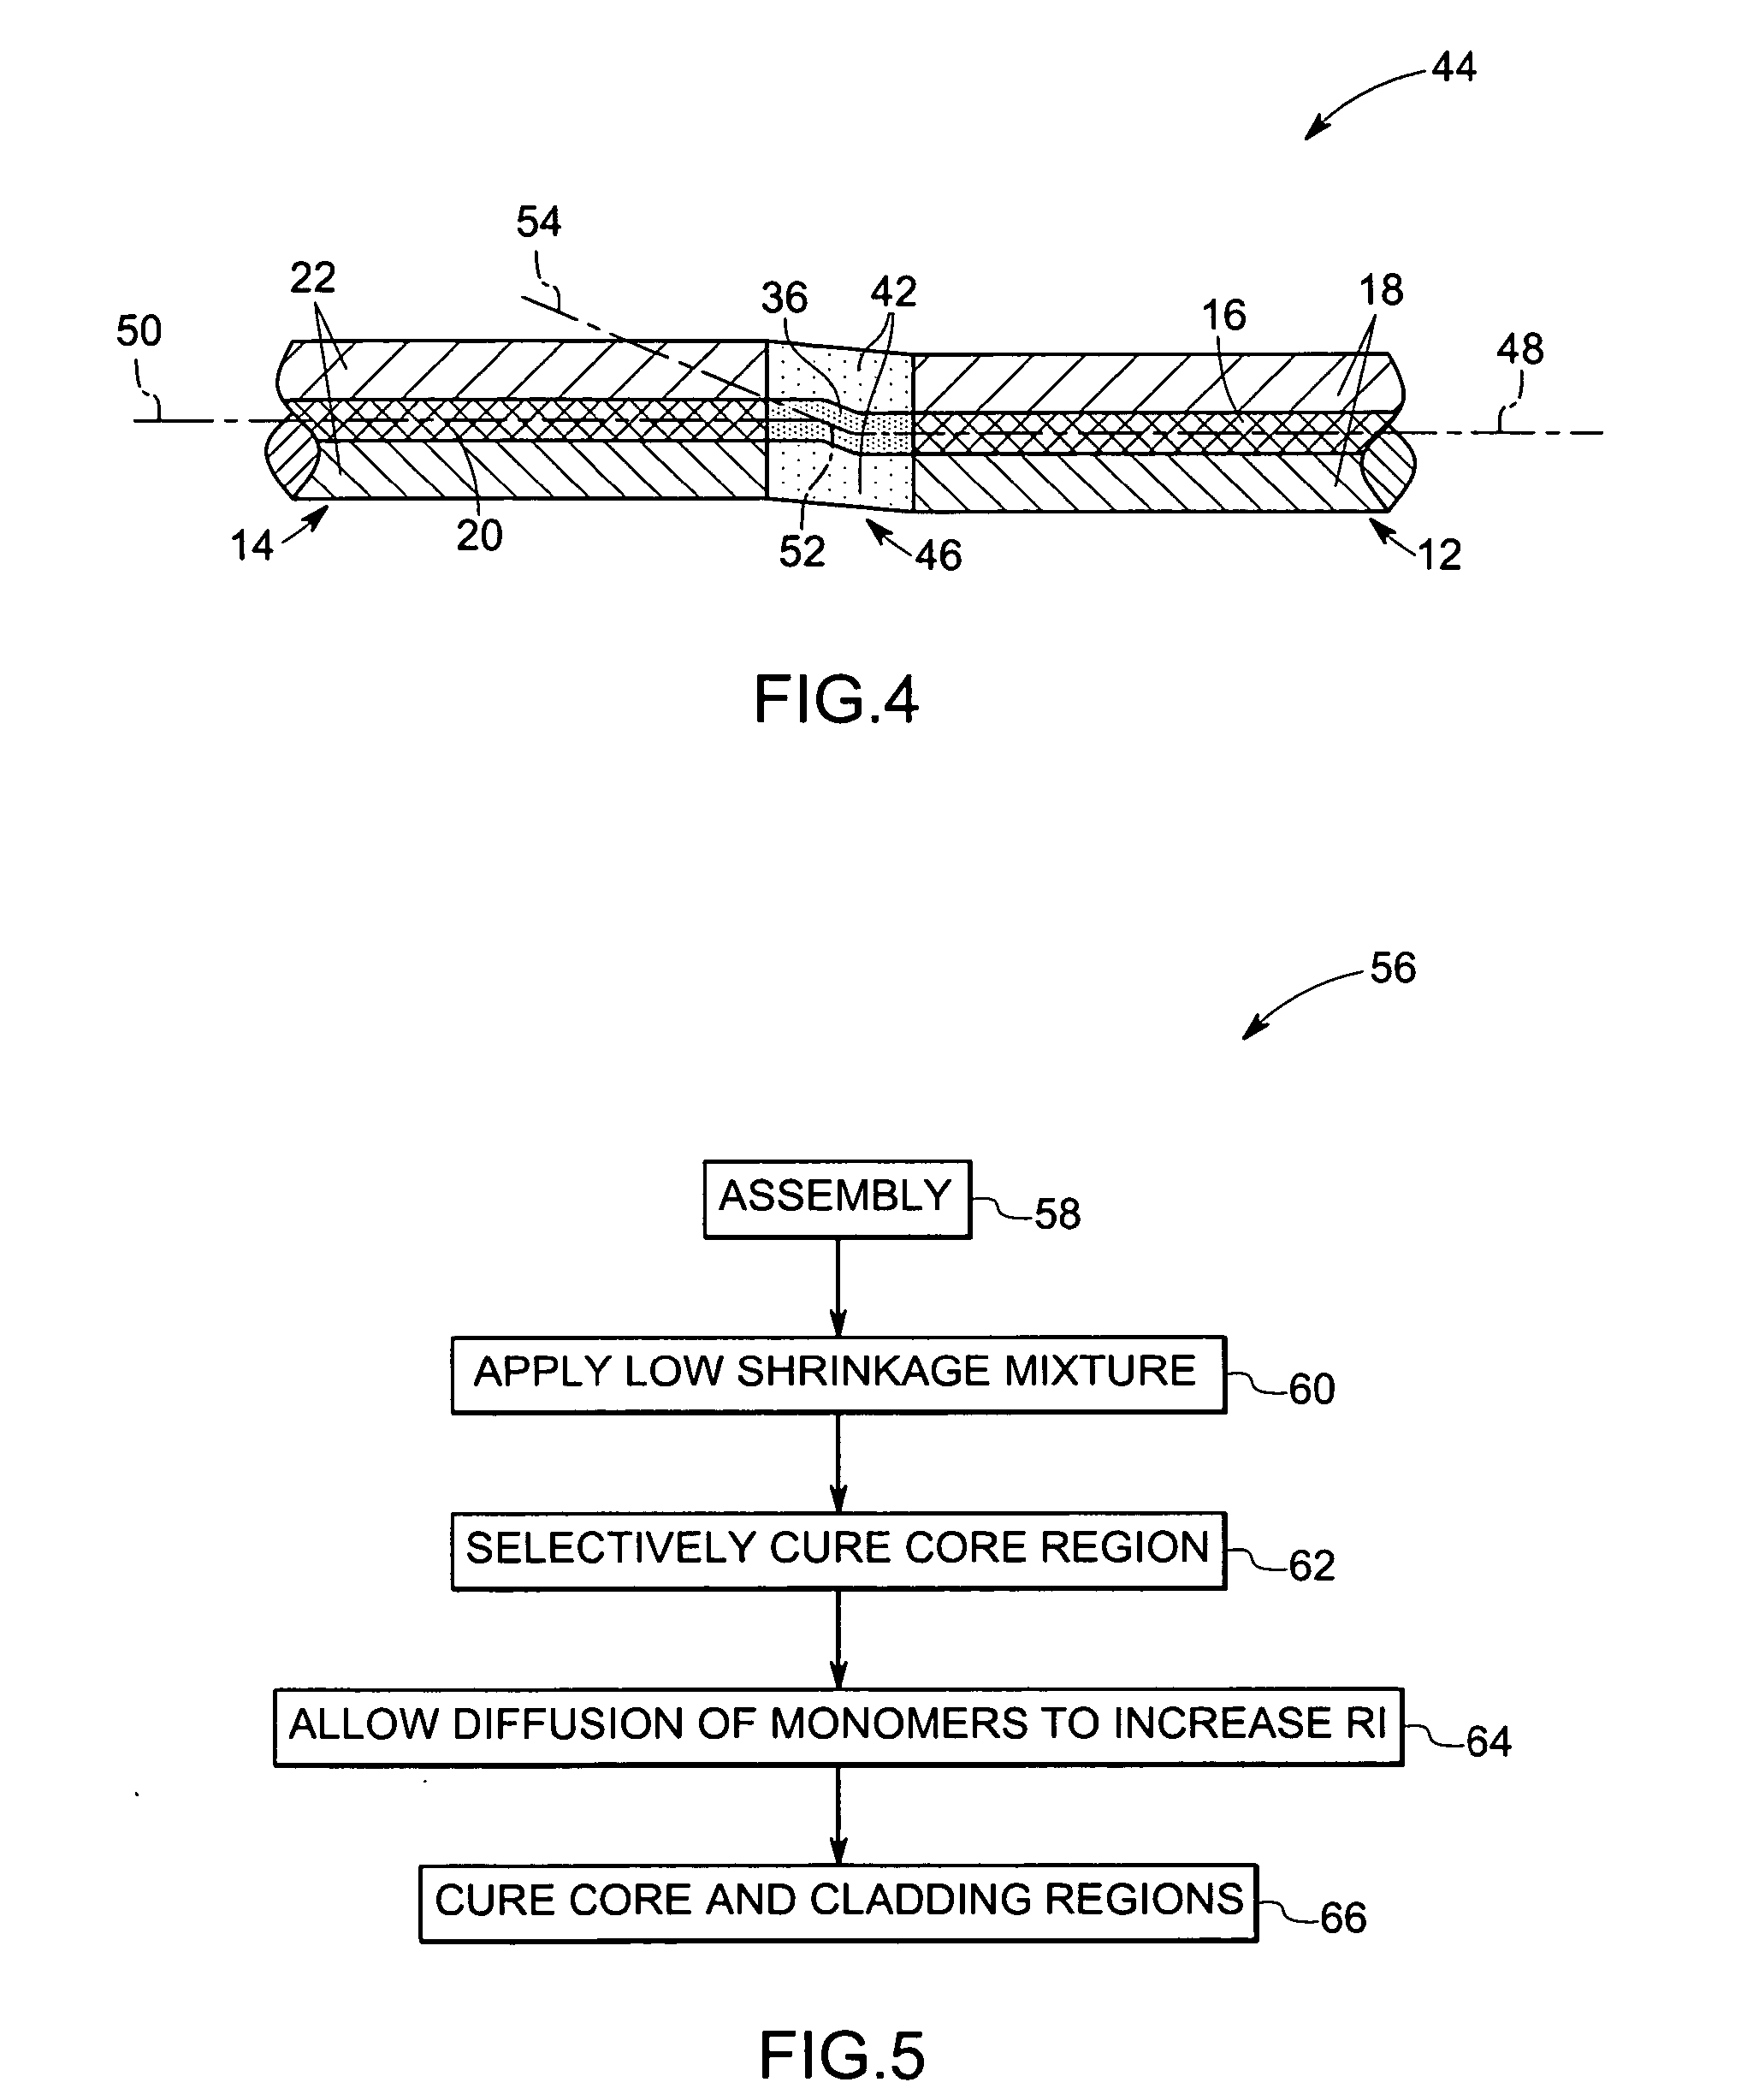 Self-forming polymer waveguide and waveguide material with reduced shrinkage